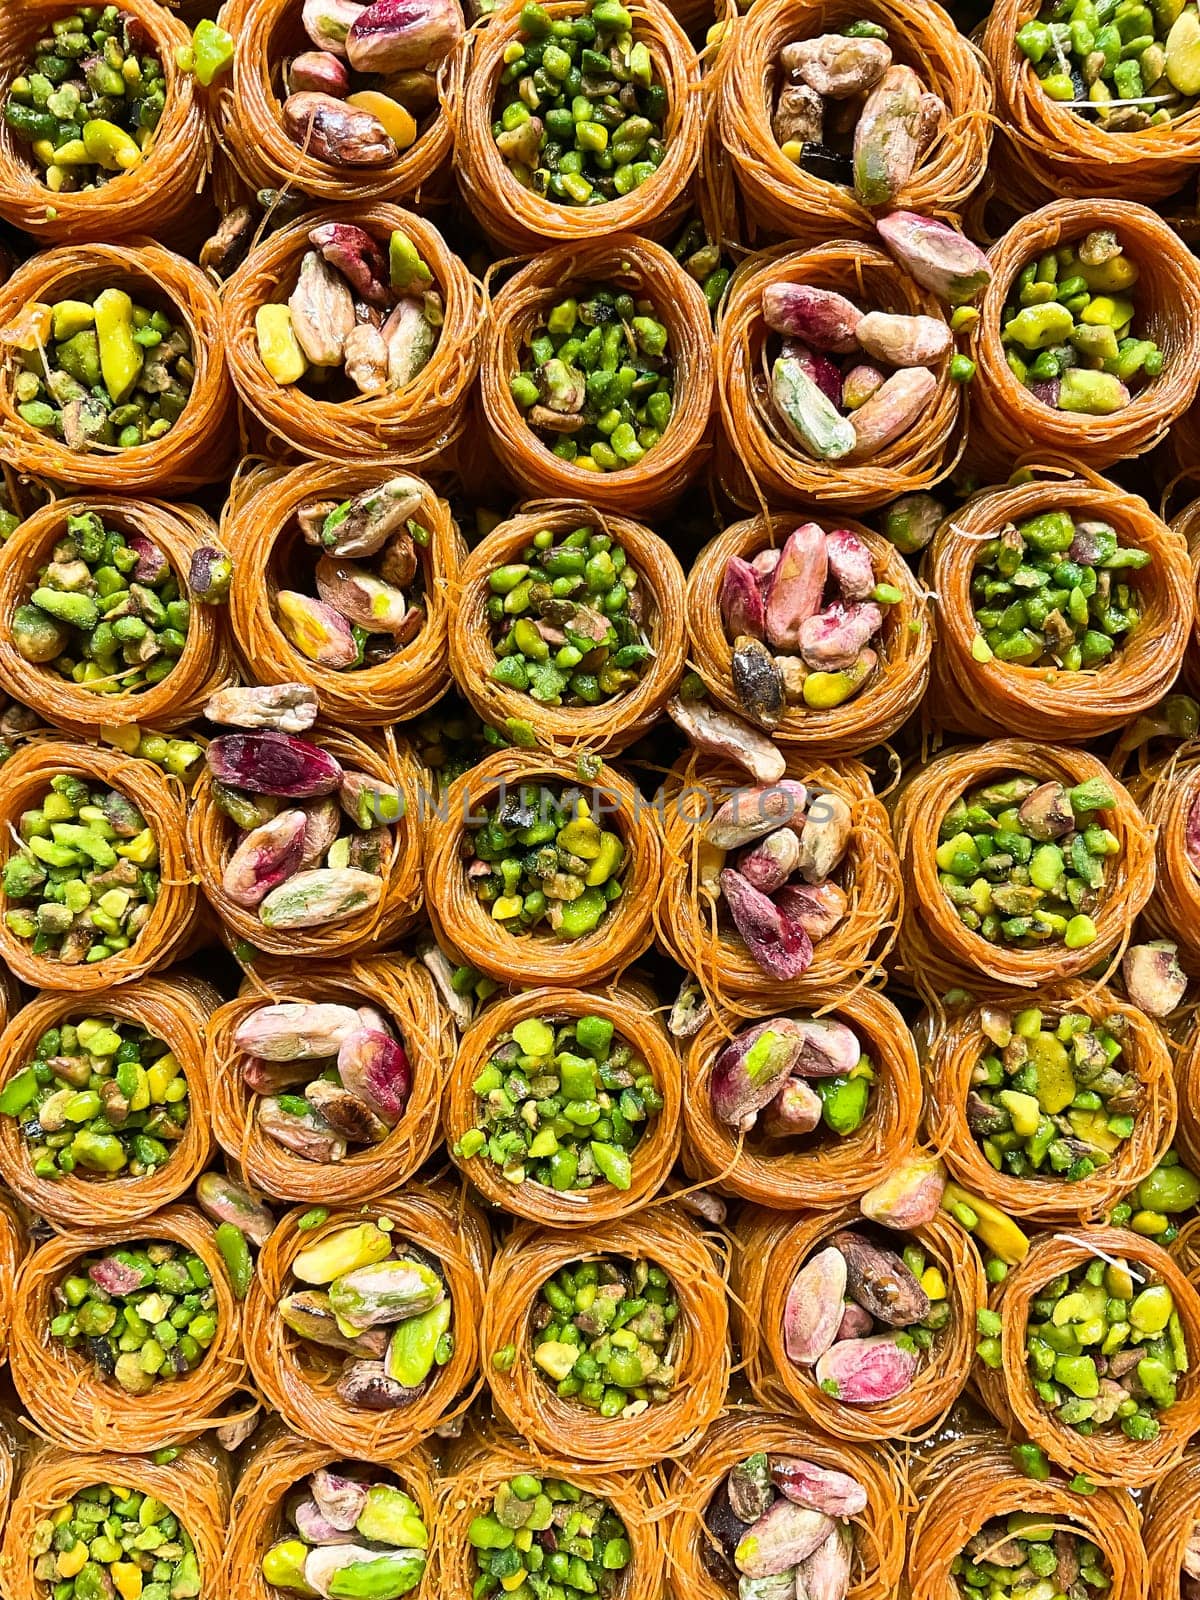 Oriental sweets close-up. Baklava with pistachios, walnuts, almonds. Photo for puzzles, postcards, articles, books.